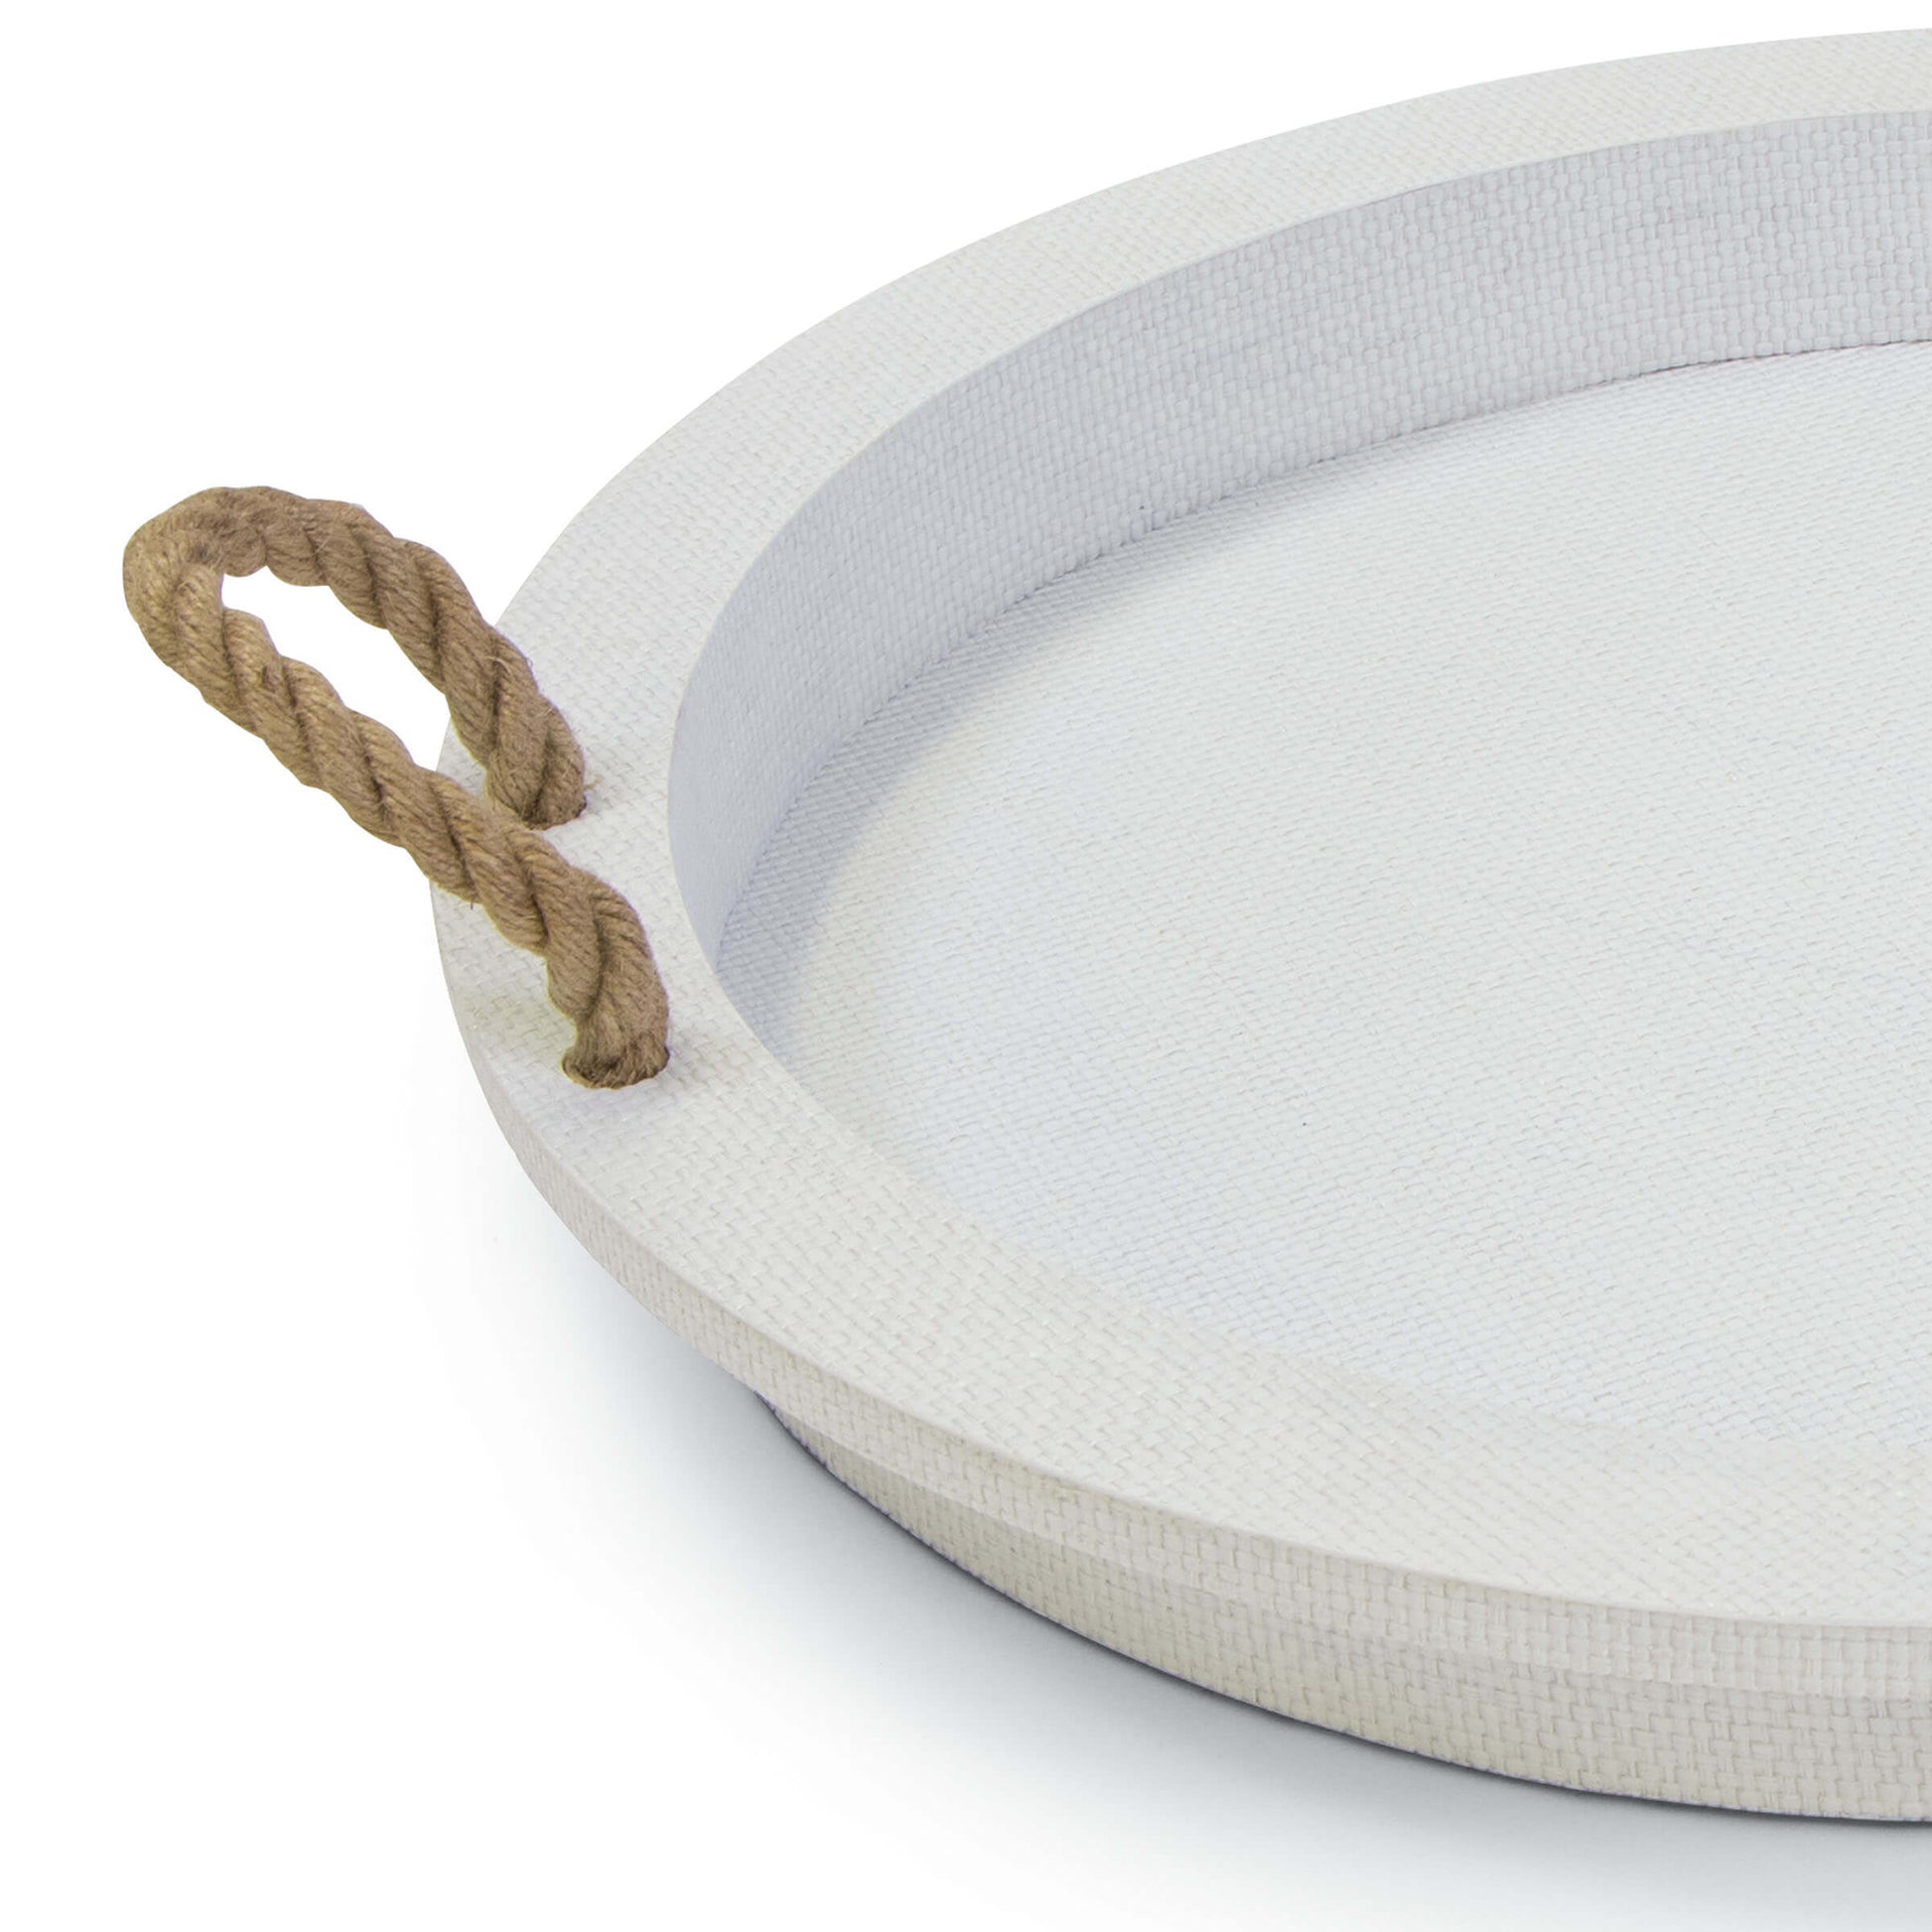 Aegean Serving Tray in White by Regina Andrew